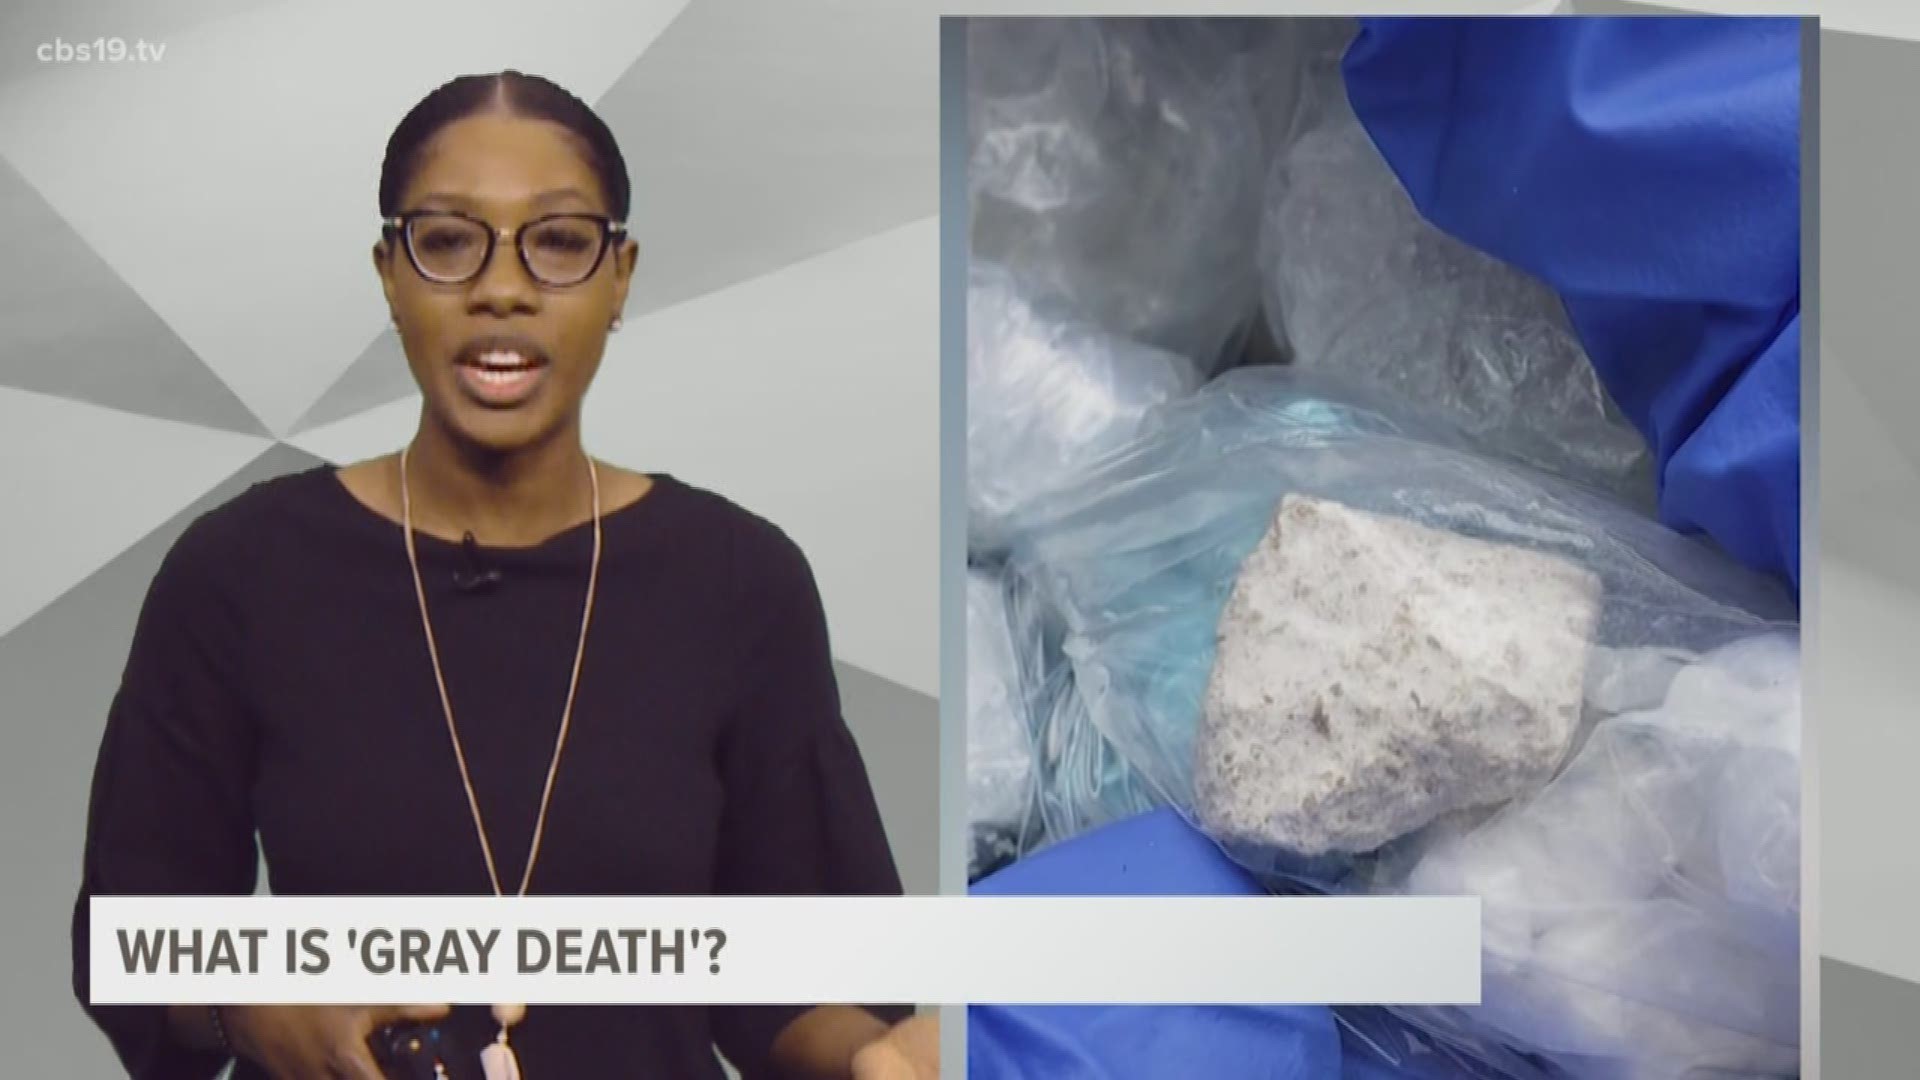 Gray death is a new street drug catching the attention of law enforcement across the country.